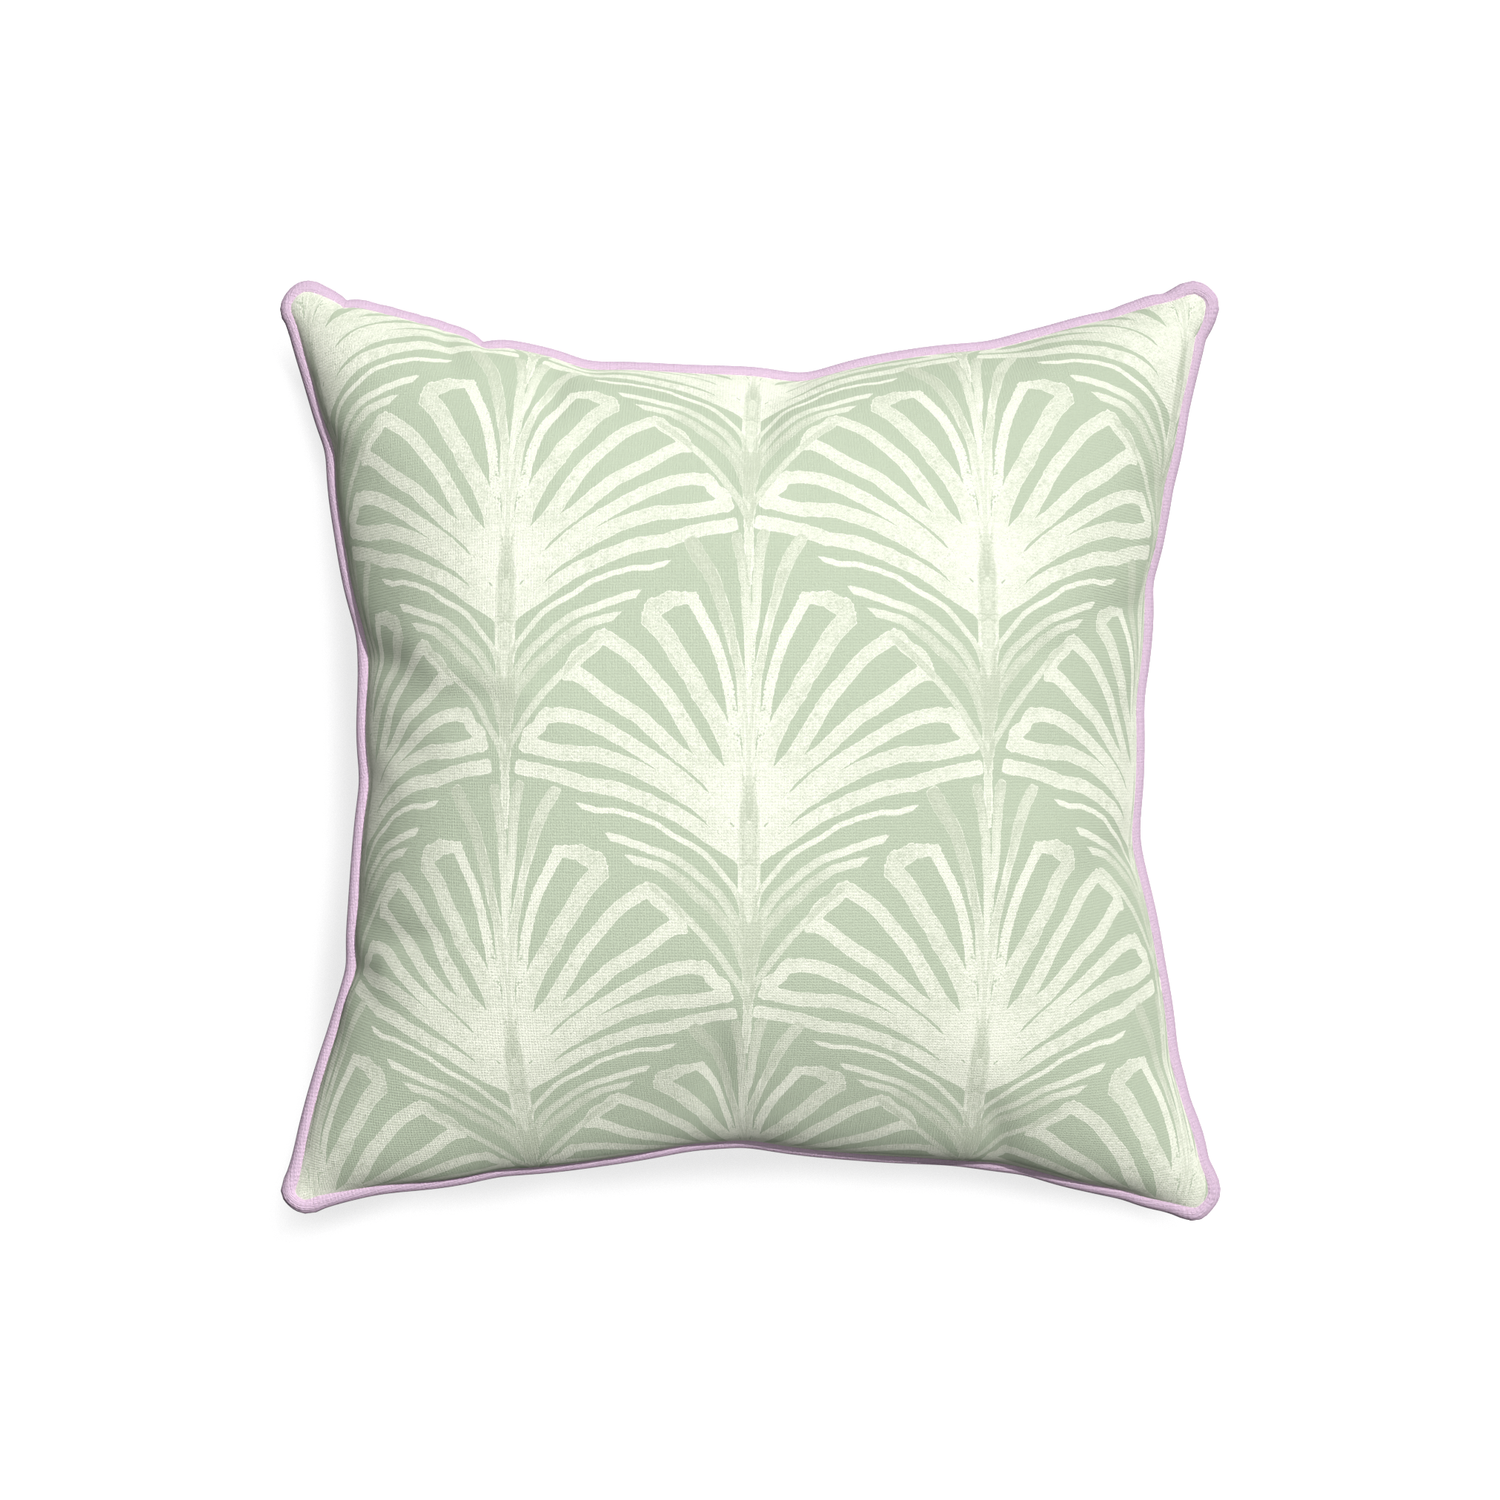 20-square suzy sage custom pillow with l piping on white background